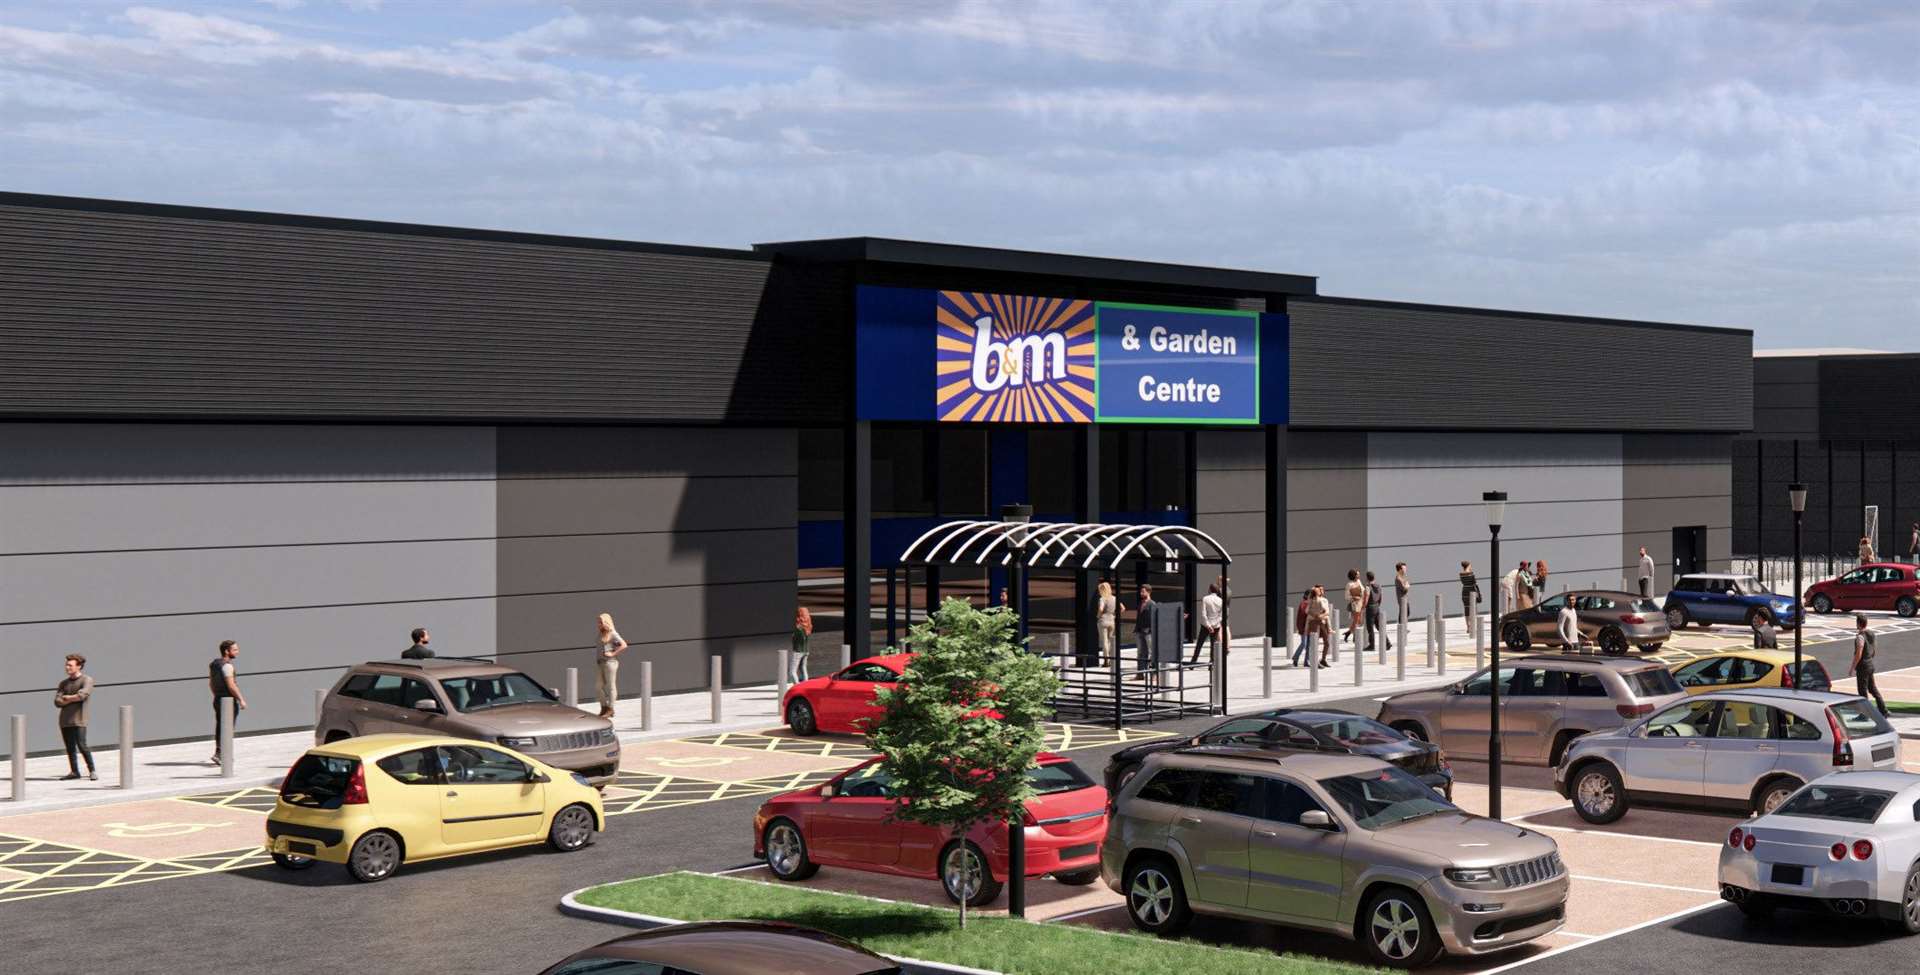 The development at Altira Business Park in Herne Bay would also include a B&M store